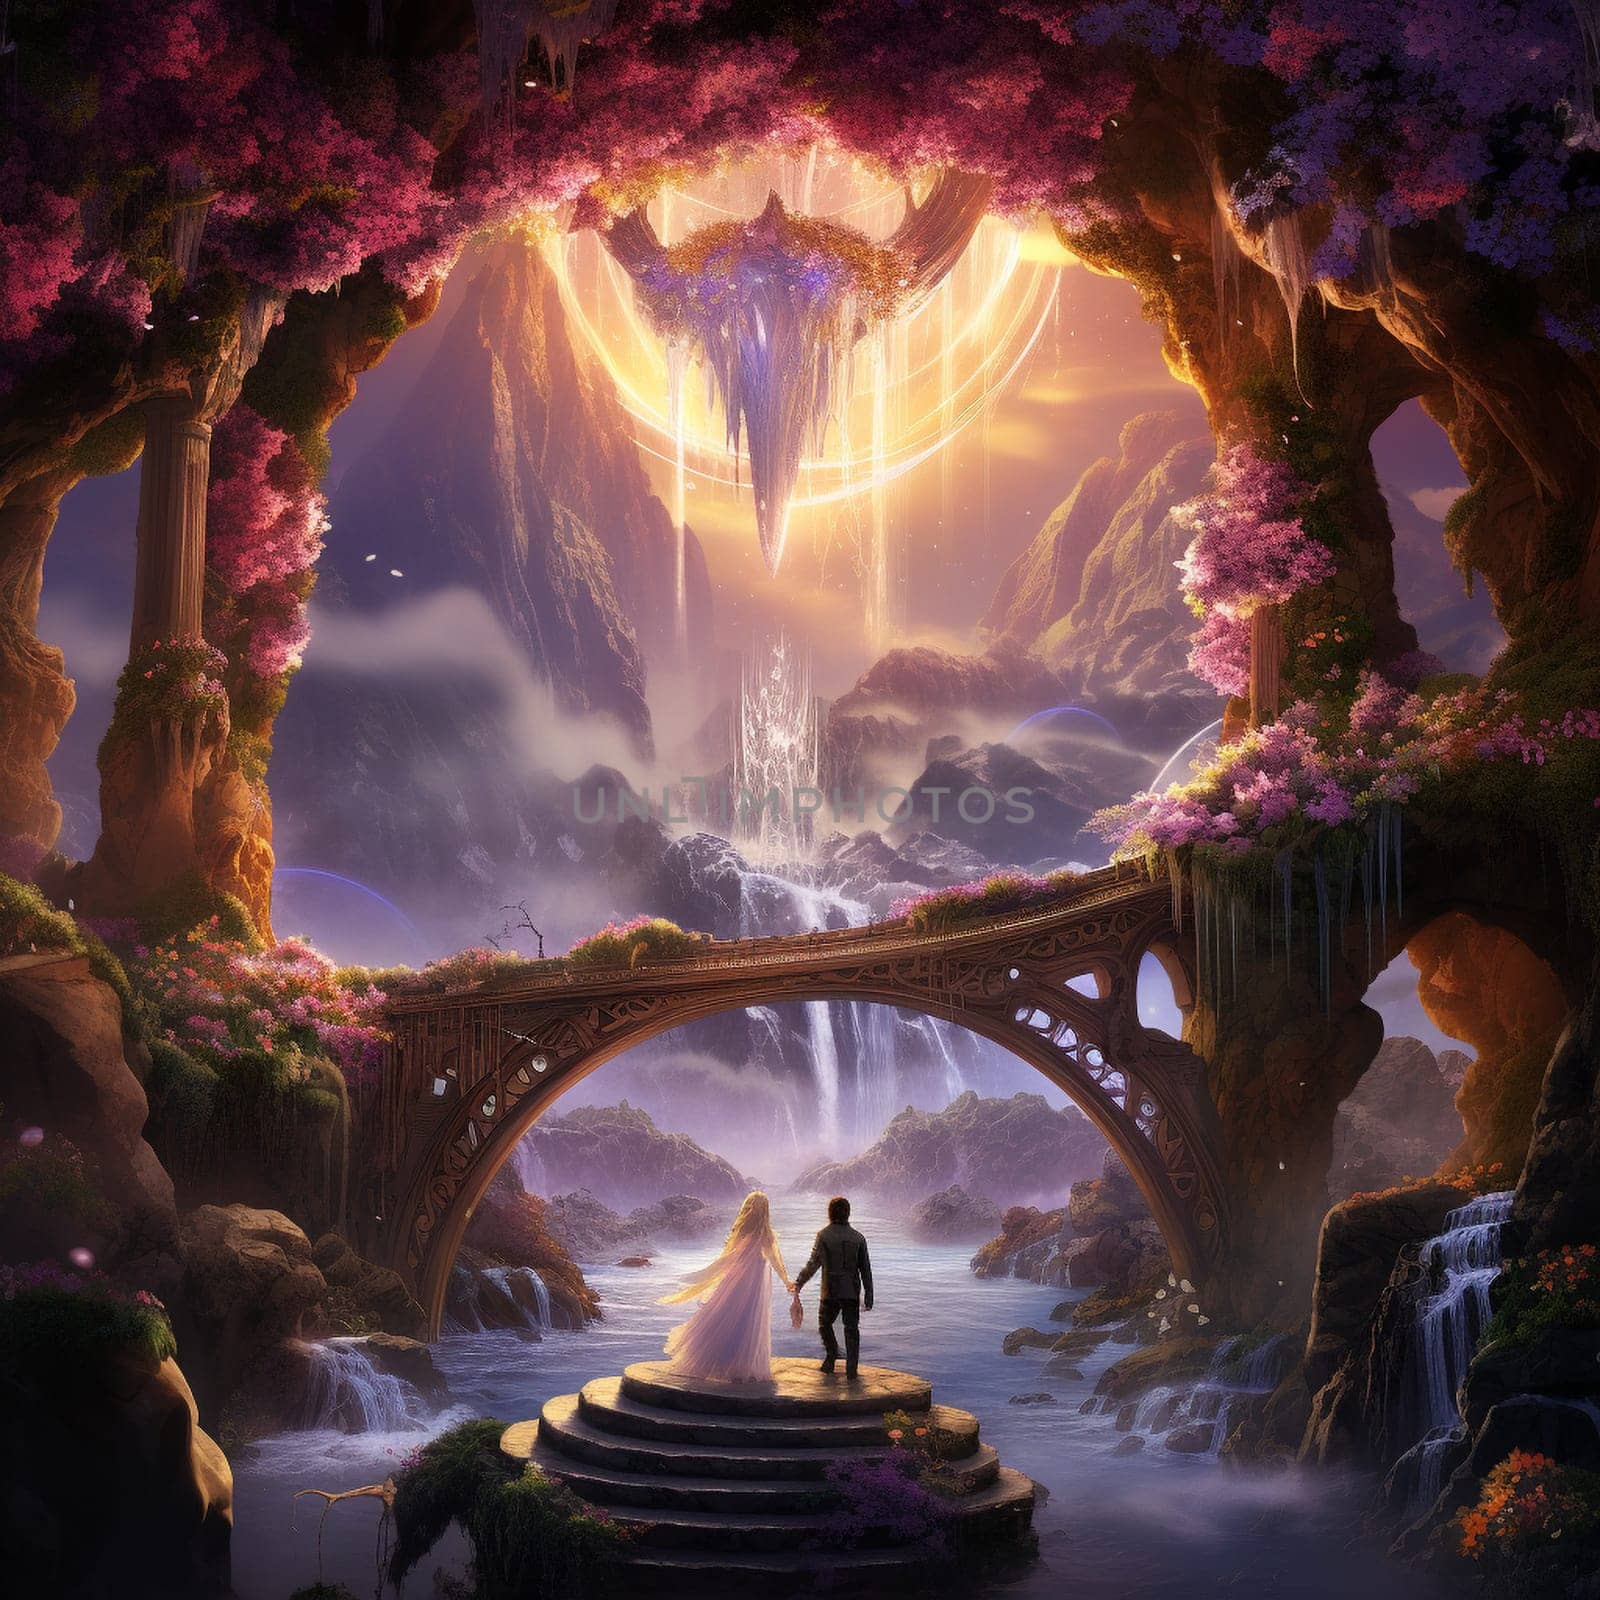 Enchanted Haven: Vows Encircled by Mystical Beauty by Sahin